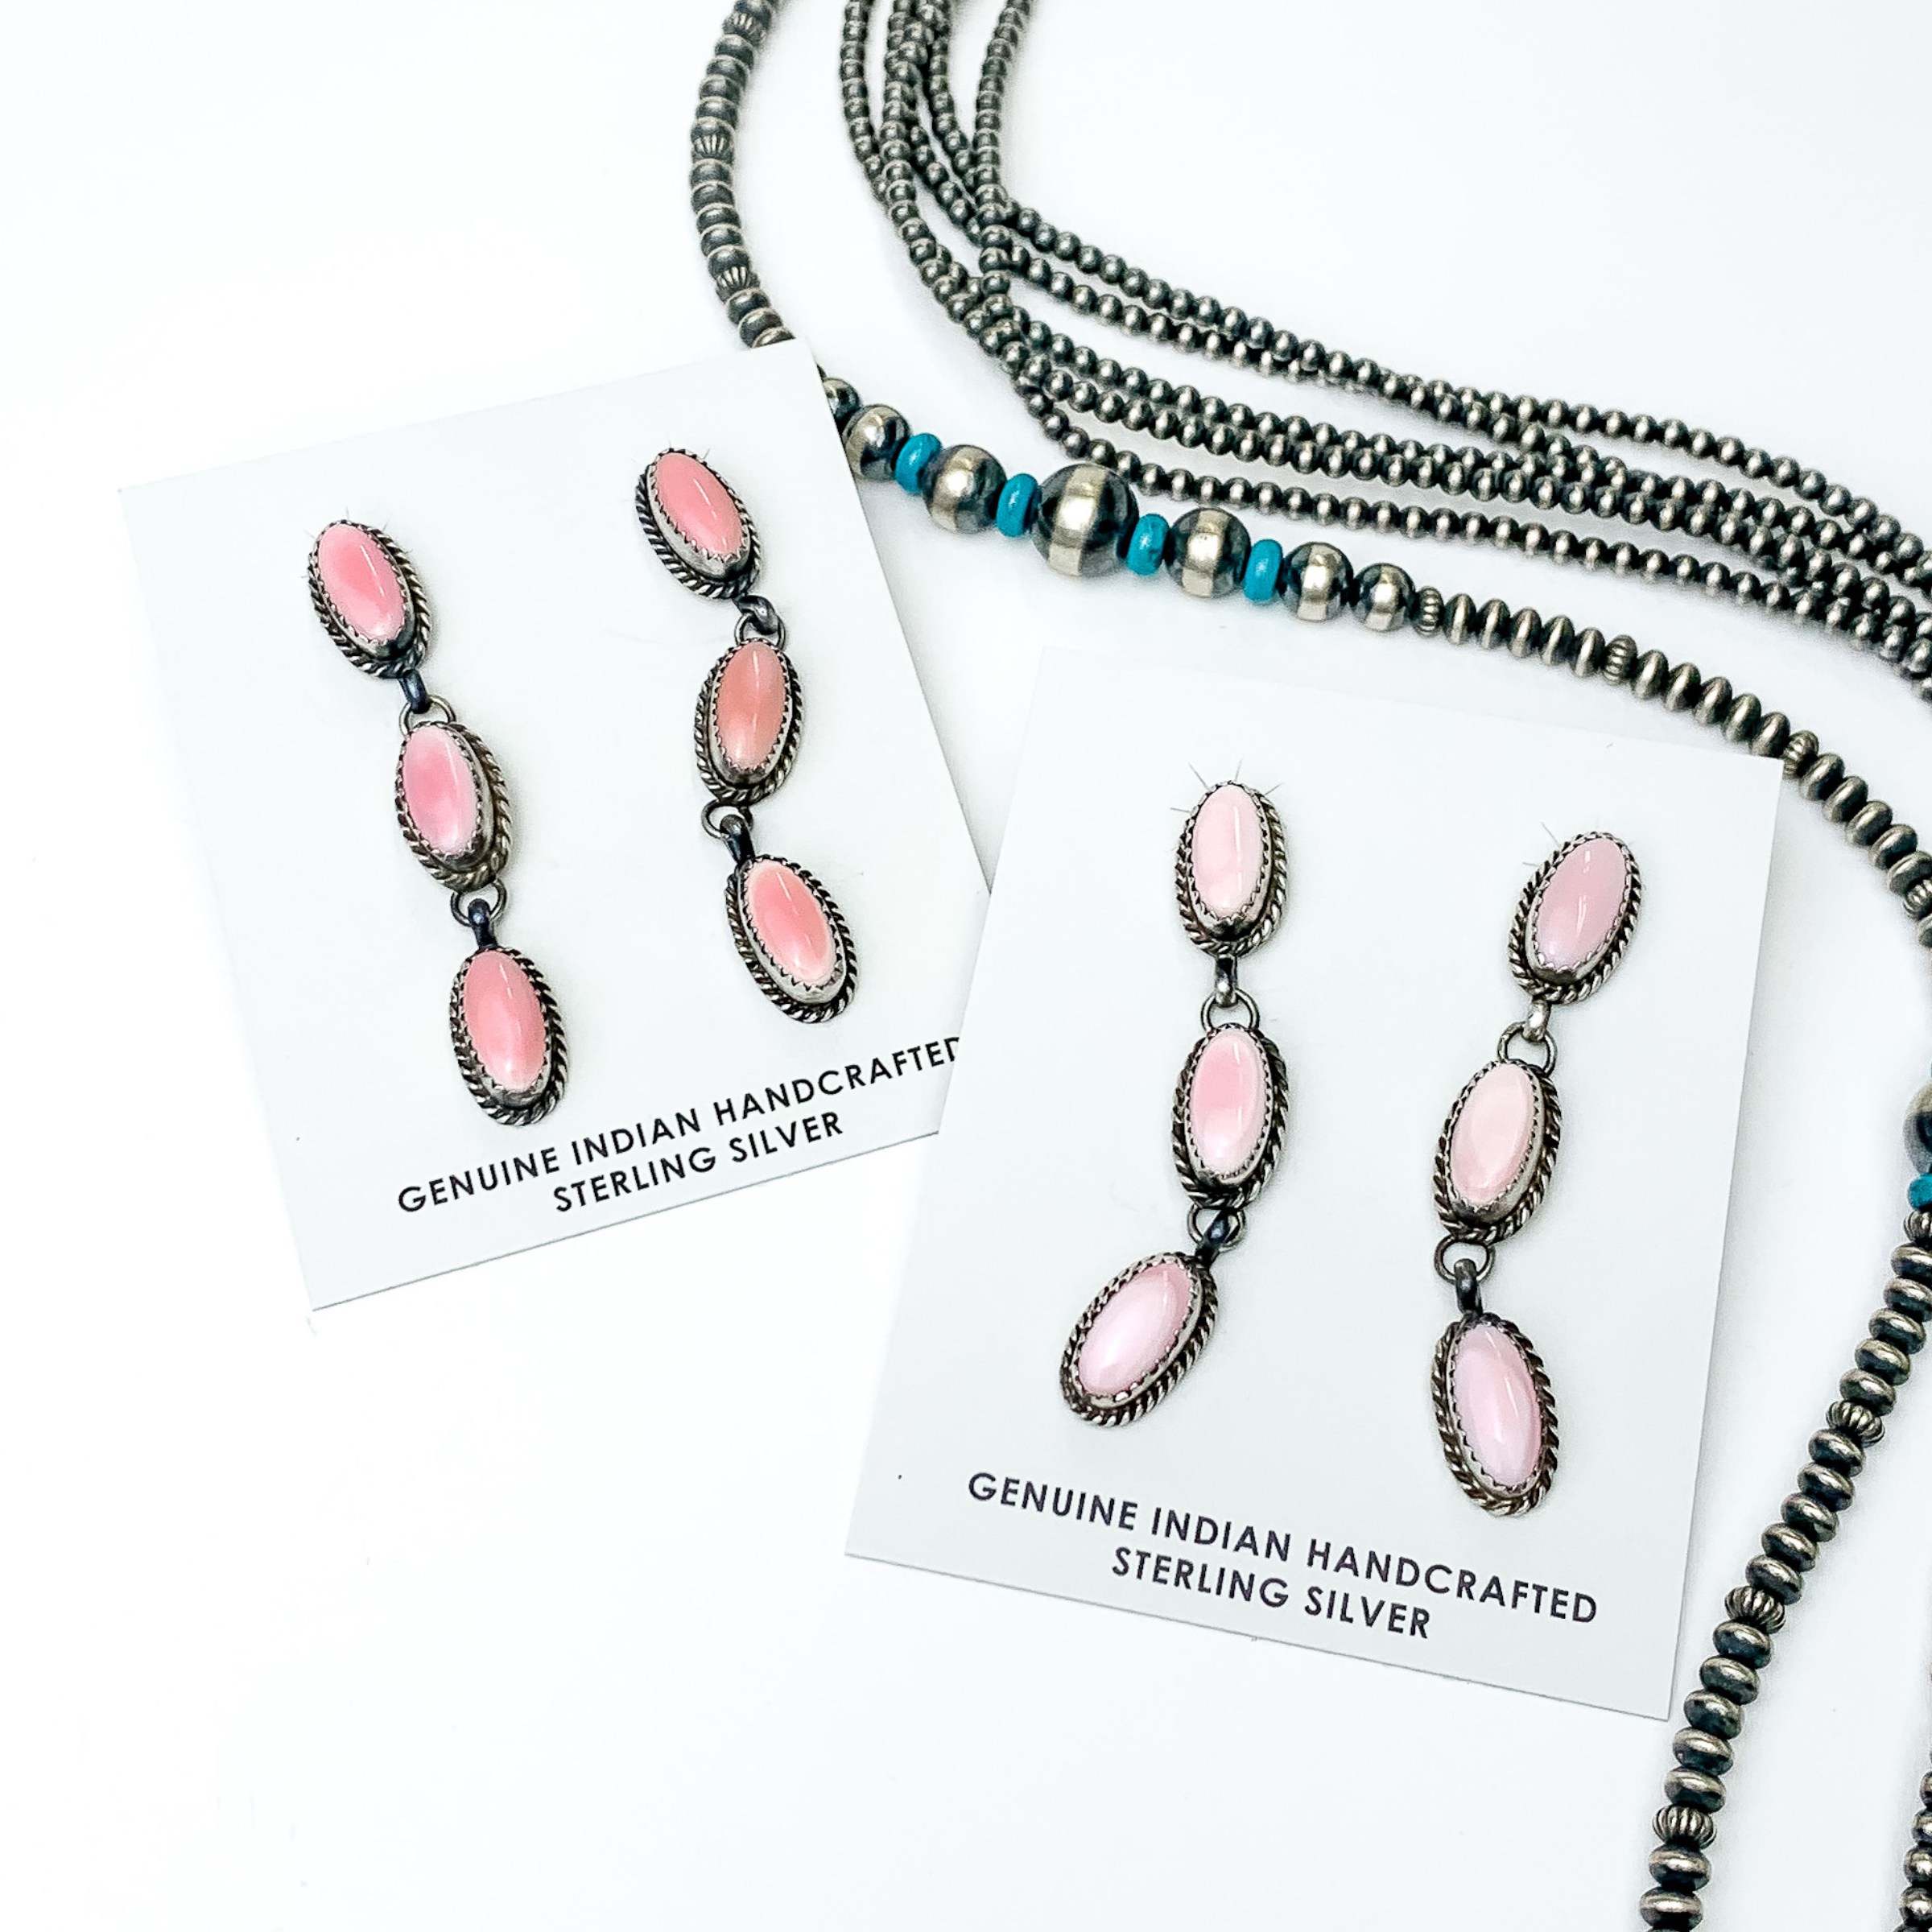 Pictured are two pairs of silver and oval drop earrings. These earrings include three pink oval stones with silver outlines. These earrings are pictured on a white background with silver beads on the right side of the picture. 